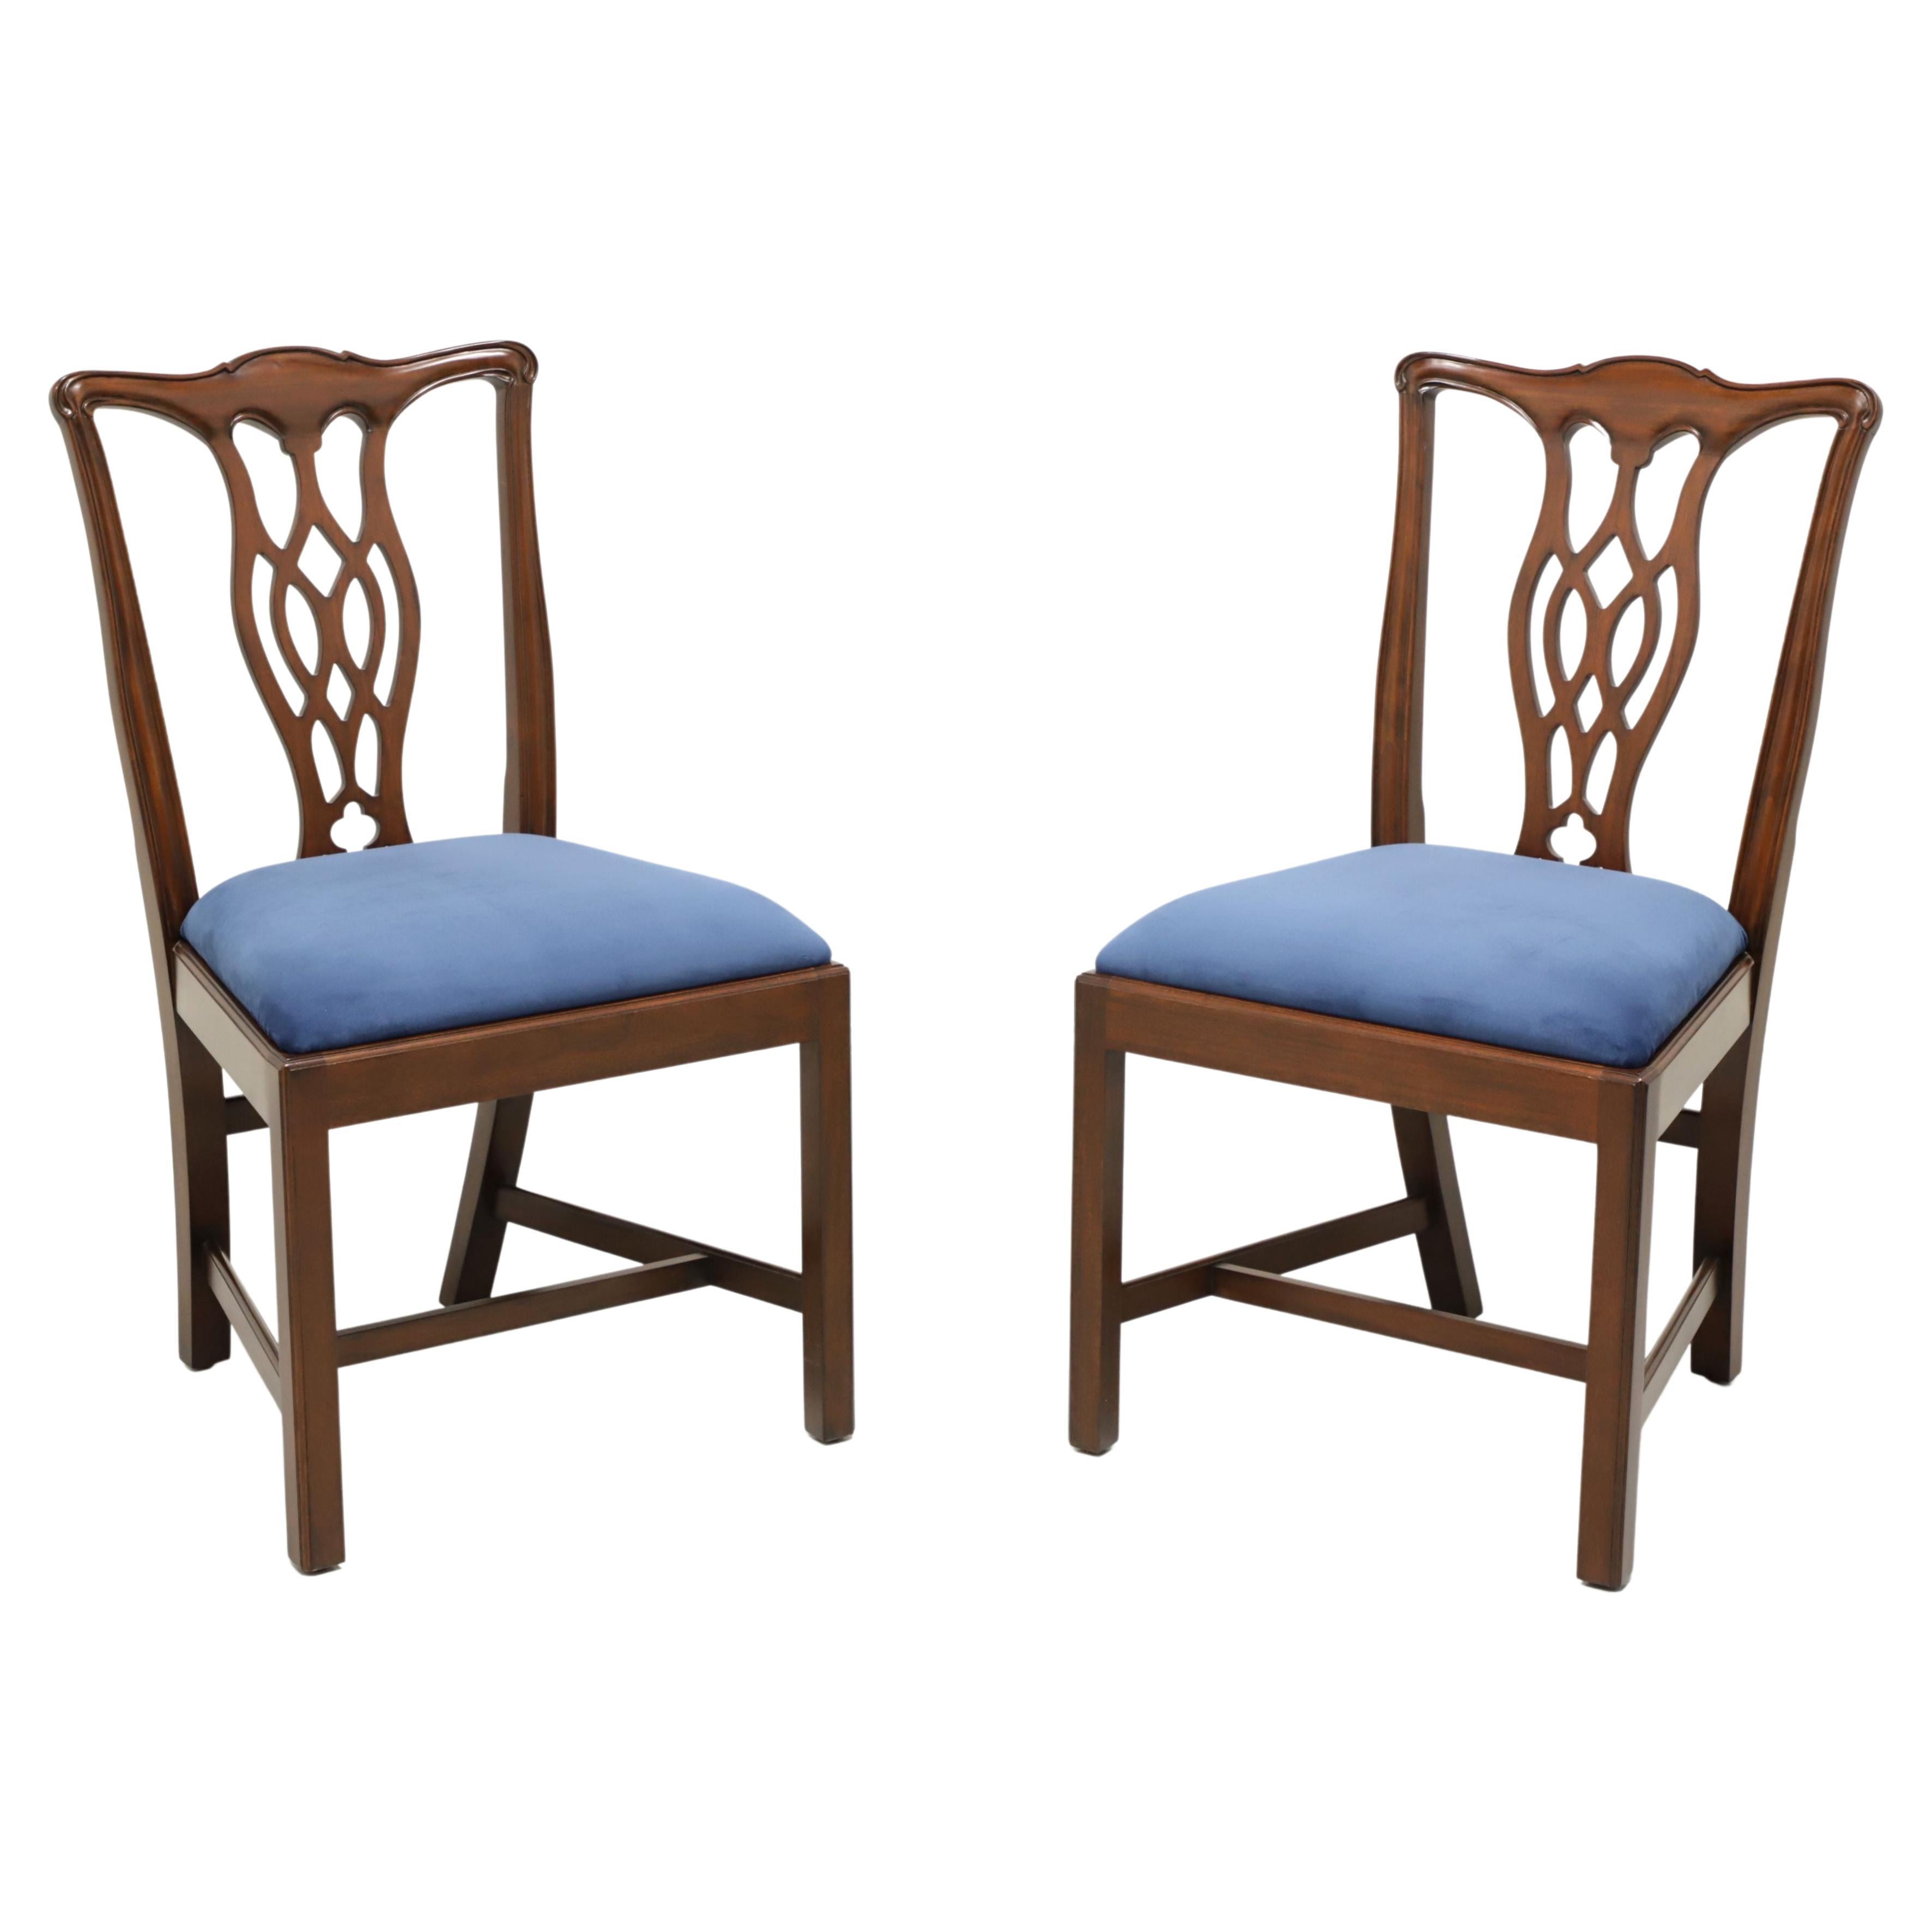 HICKORY CHAIR Mahogany Chippendale Straight Leg Dining Side Chairs - Pair